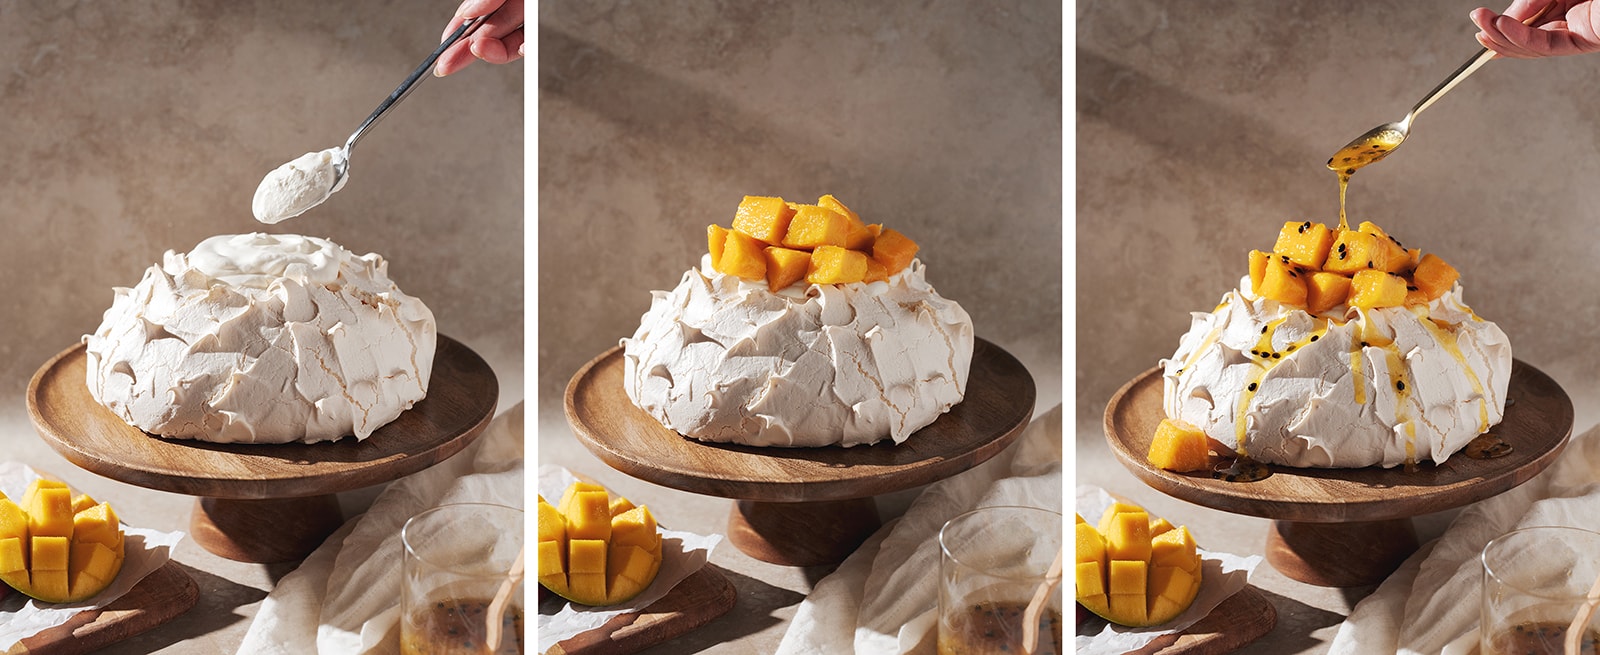 topping pavlova with whipped cream, mangoes, and passionfruit